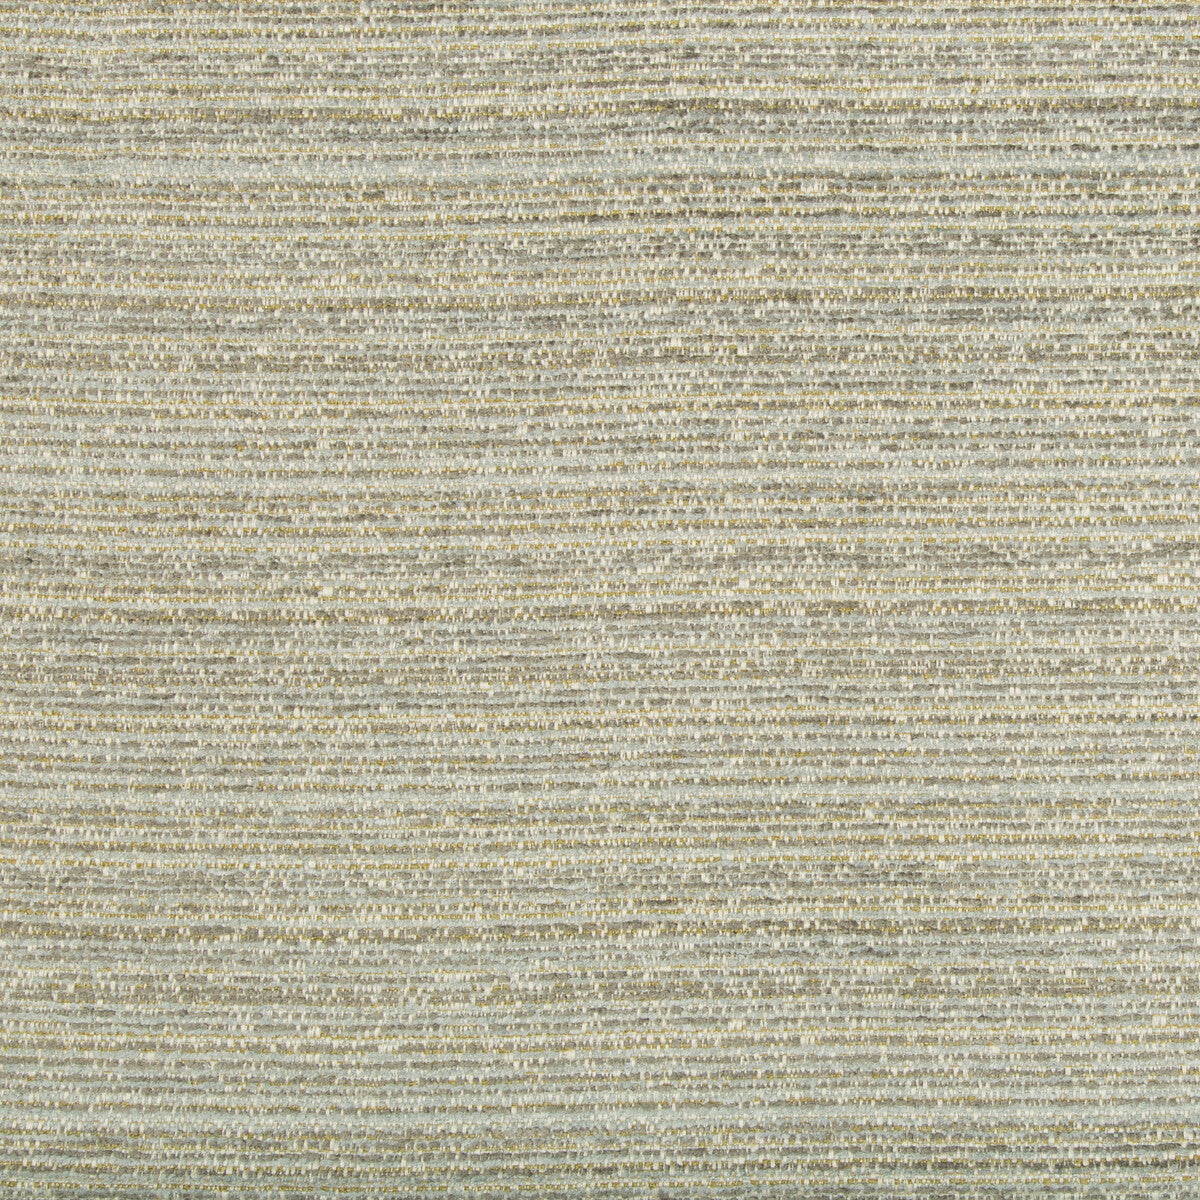 Kravet Contract fabric in 35048-1523 color - pattern 35048.1523.0 - by Kravet Contract in the Incase Crypton Gis collection